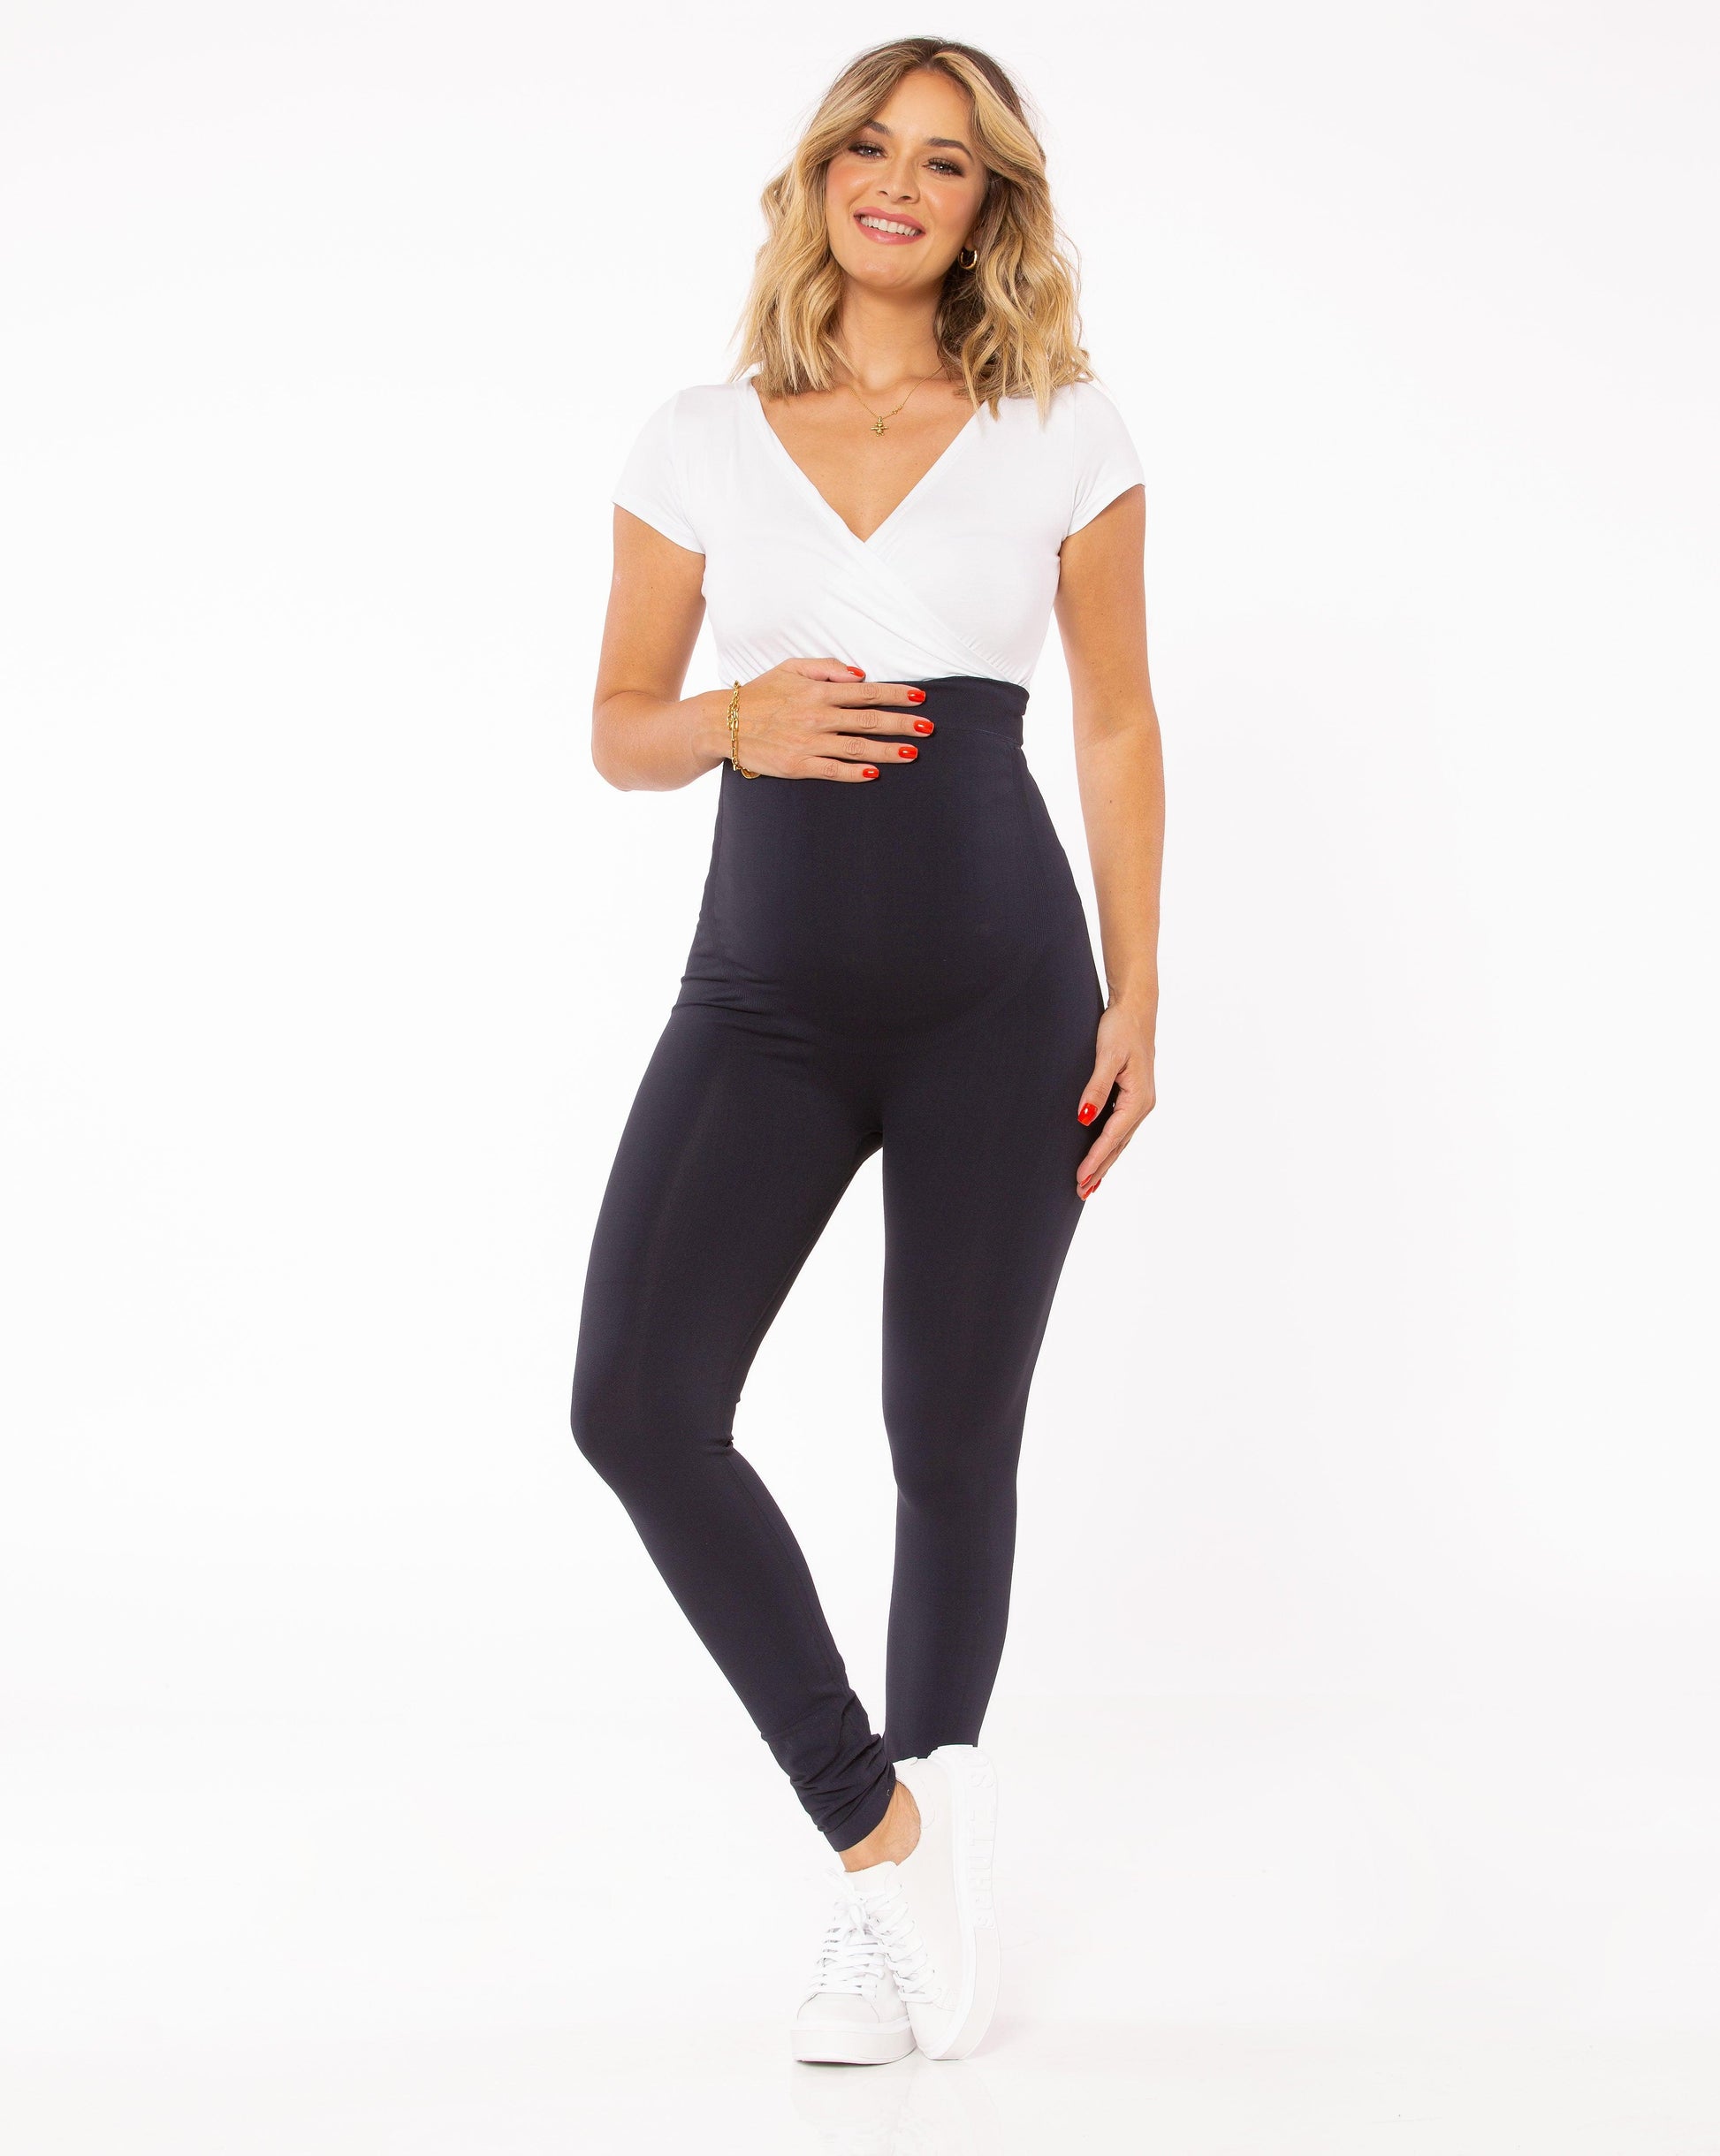 BLACK MATERNITY SEAMLESS LEGGING WITH BELLY SUPPORT - AJ MATERNITY CLOTHING